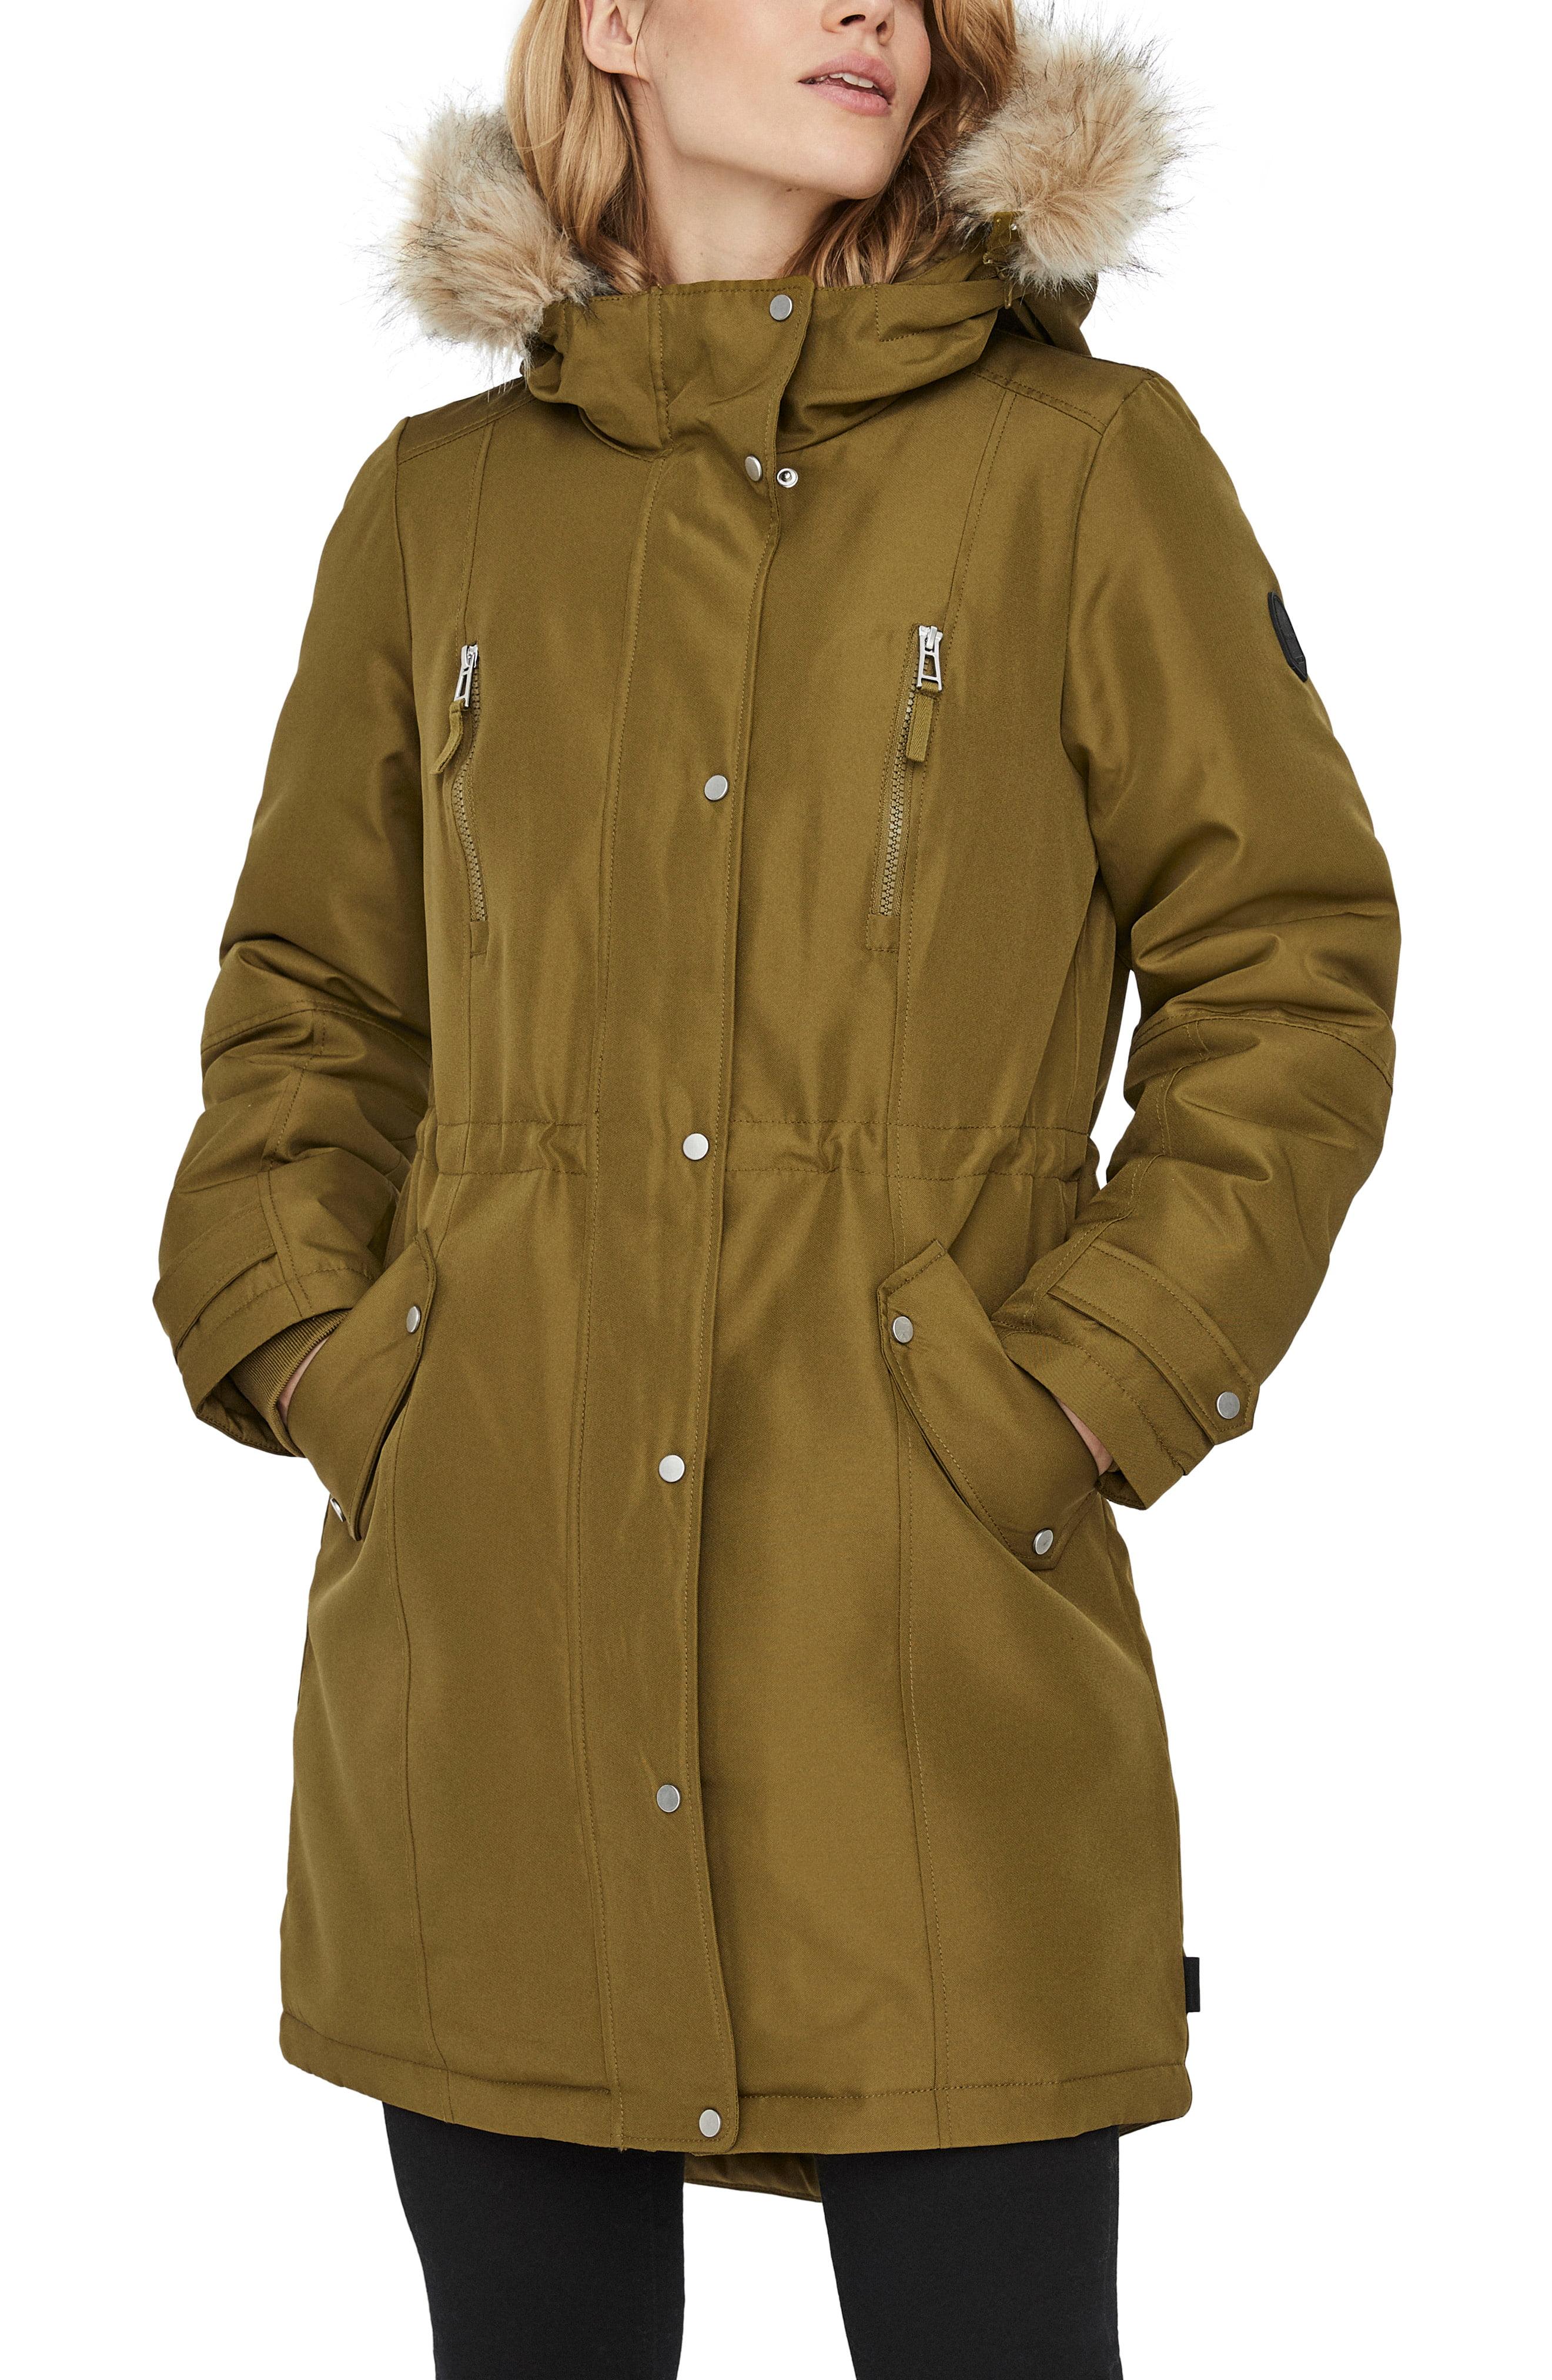 Vero Moda Expedition Track Parka With Faux Fur Trim Hood in Green - Lyst